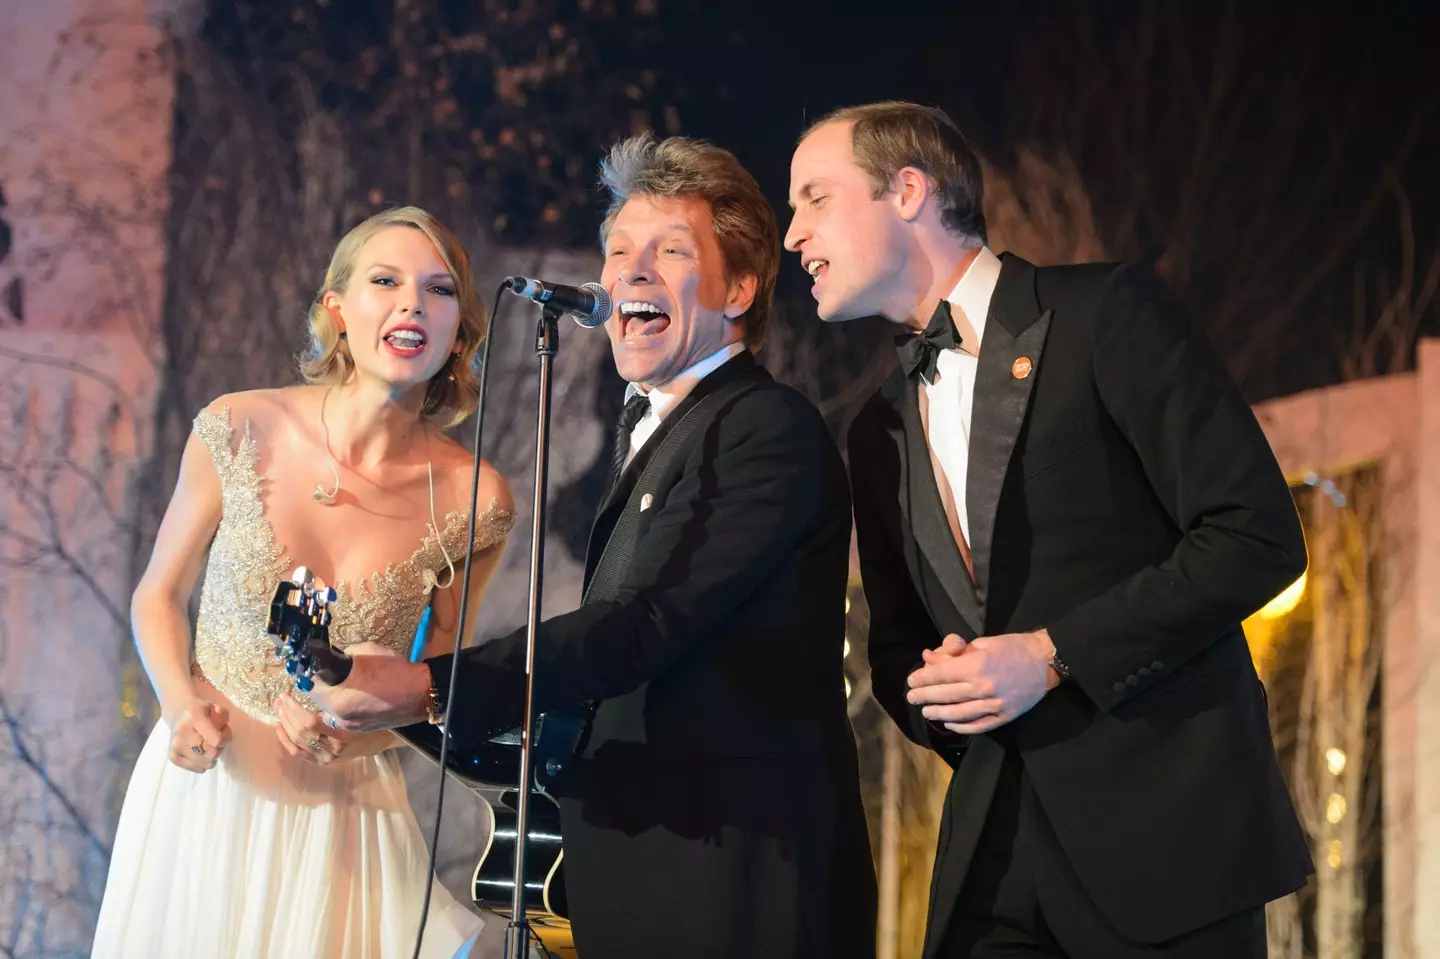 Prince William recalled an event for homeless charity Centrepoint with Taylor Swift and Jon Bon Jovi (